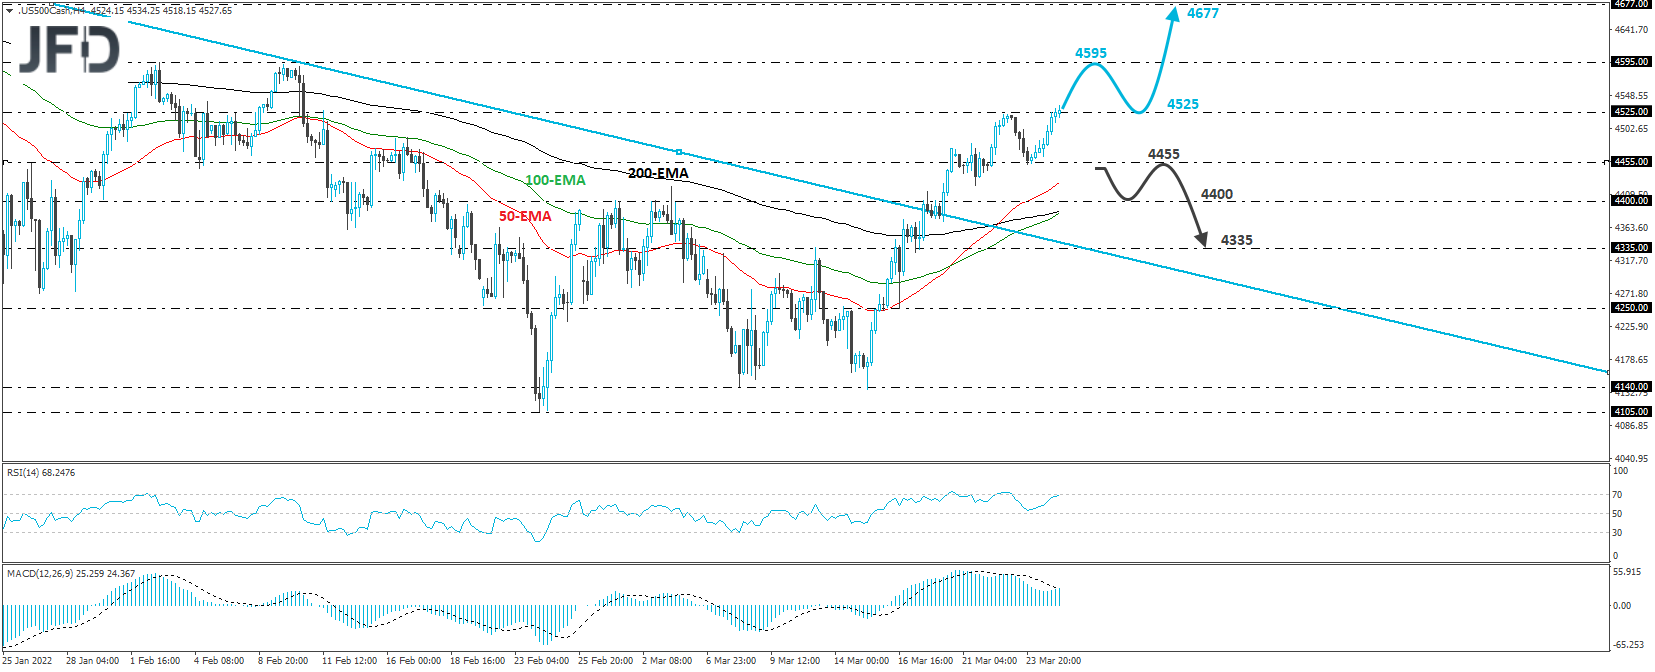 S&P 500 Cash Index 4 Hour Technical Analysis.